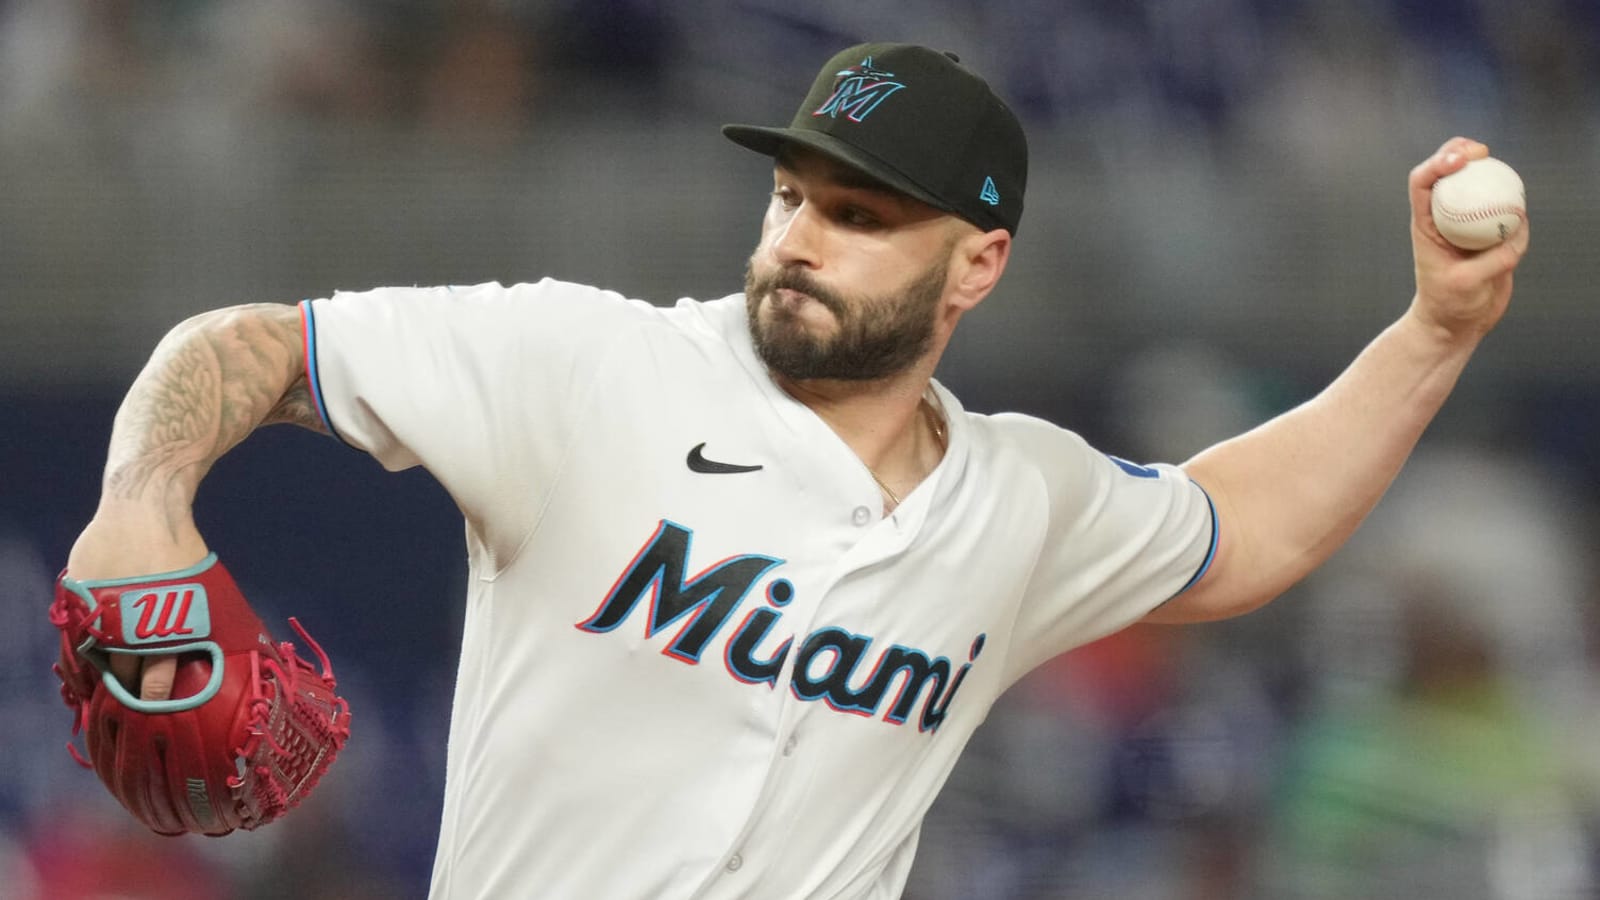 Marlins southpaw wins arbitration hearing, gets nice pay raise